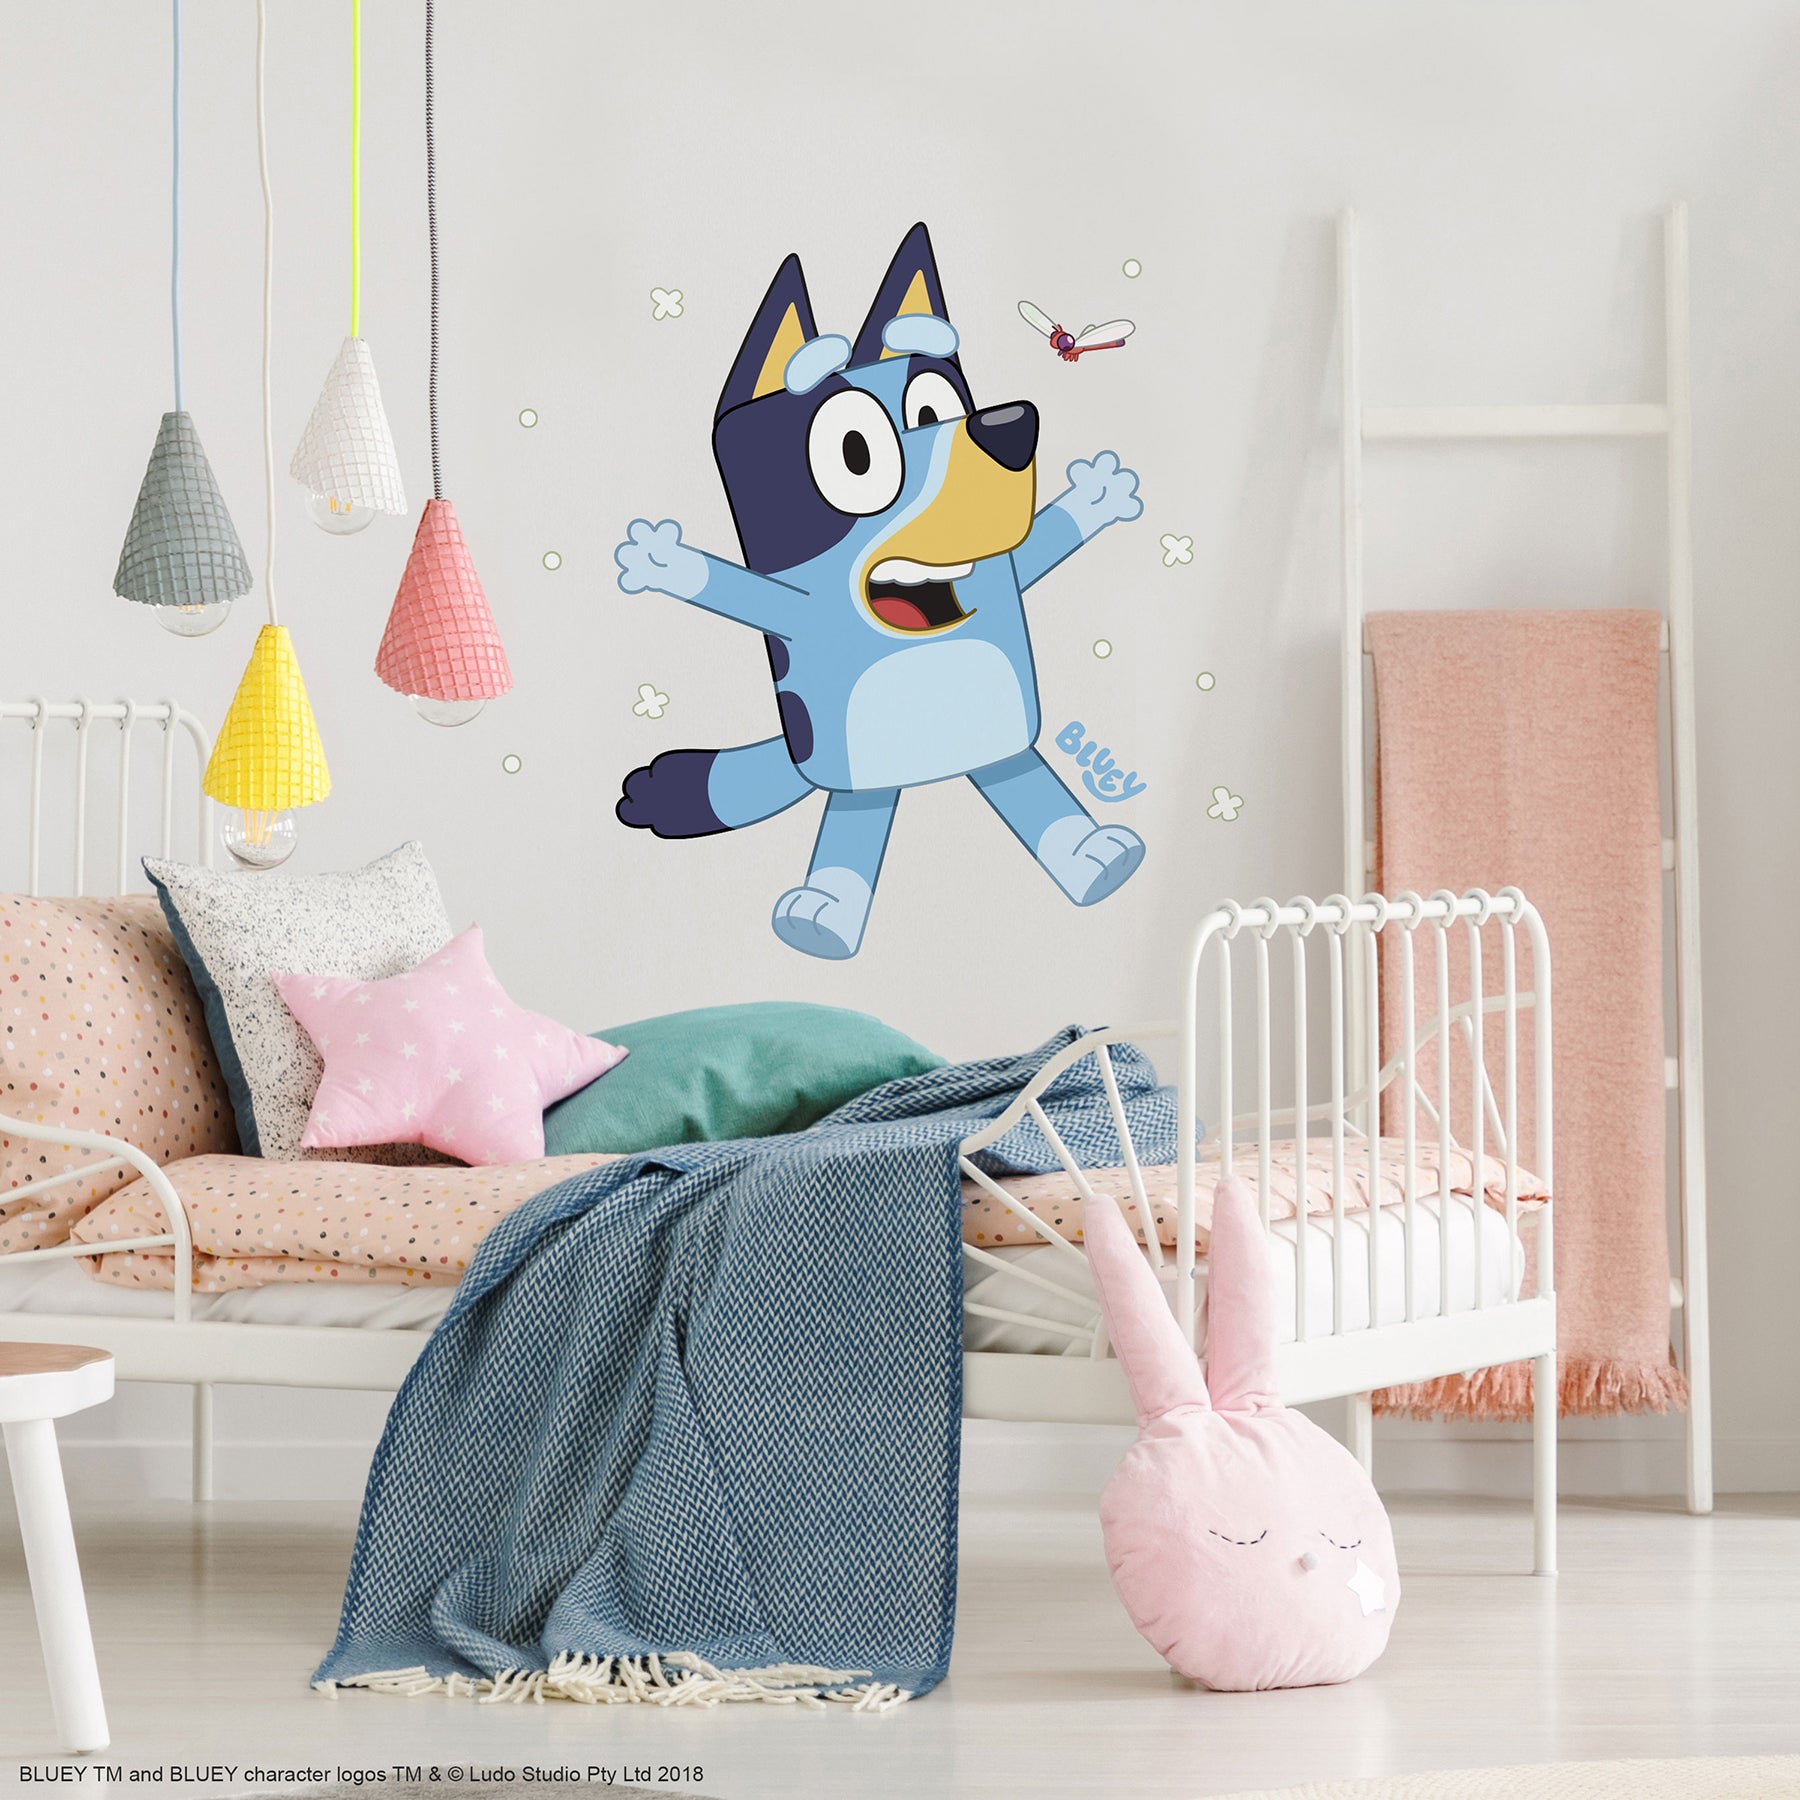 Bluey Character Peel and Stick Wall Decals Wall Decals RoomMates Decor   